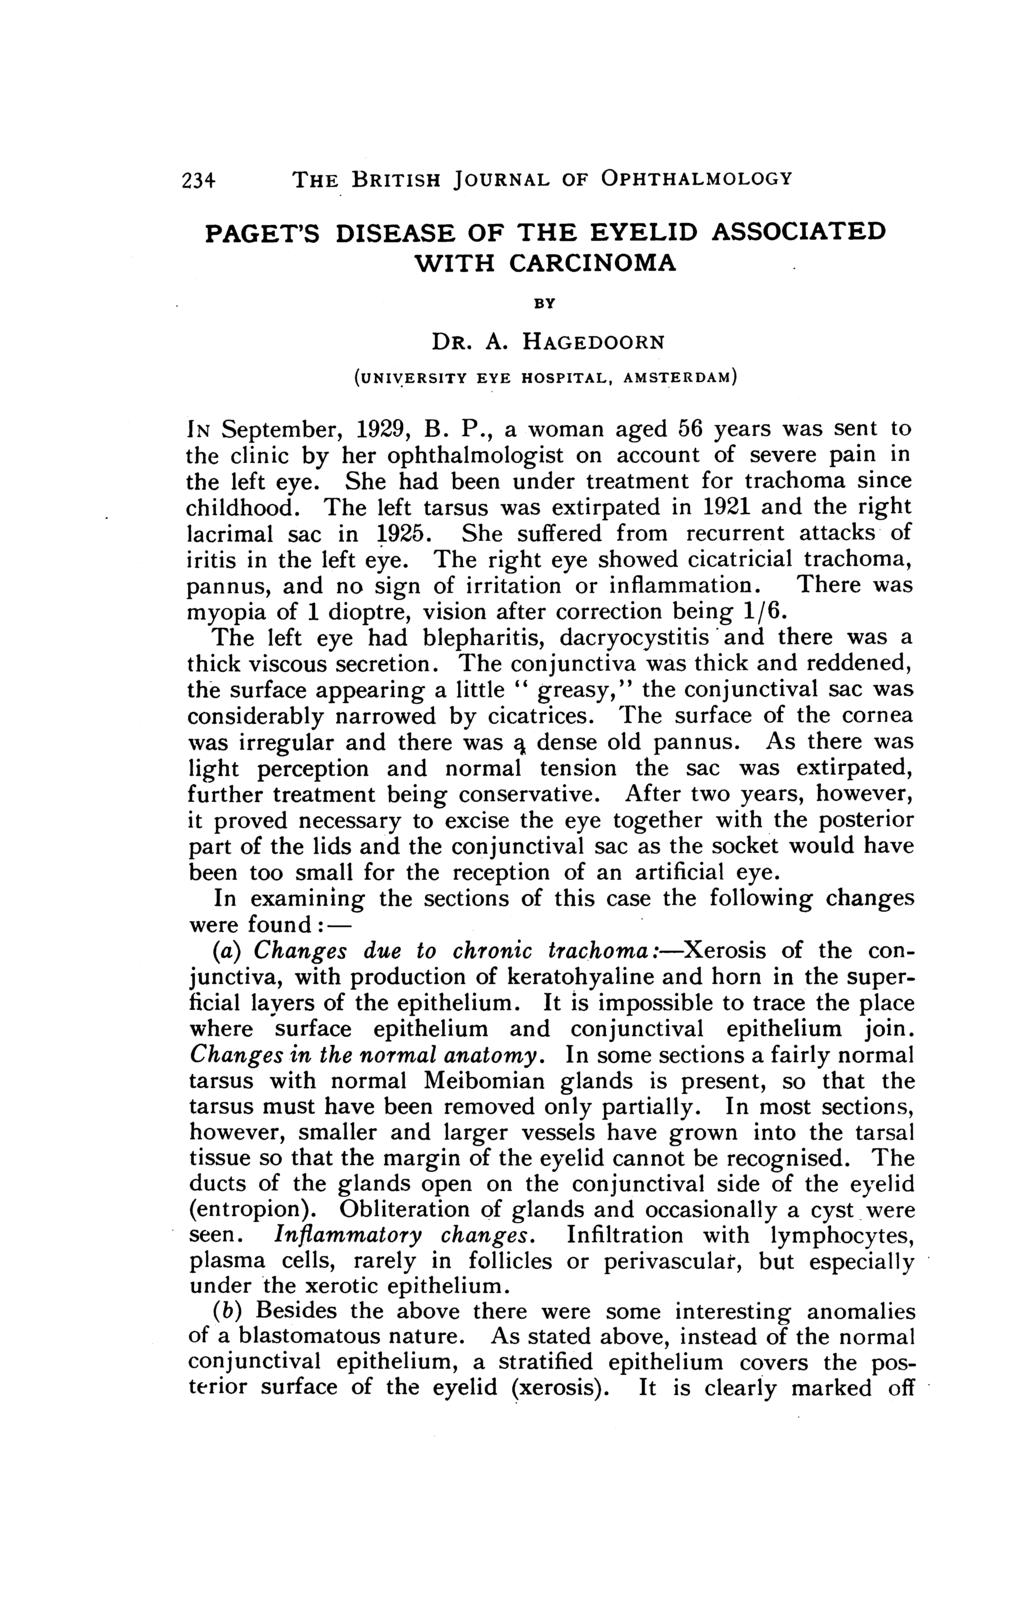 234 THE BRITISH JOURNAL OF OPHTHALMOLOGY PAGET'S DISEASE OF THE EYELID ASSOCIATED WITH CARCINOMA BY DR. A. HAGEDOORN (UNIVERSITY EYE HOSPITAL, AMSTERDAM) IN September, 1929, B. P., a woman aged 56 years was sent to the clinic by her ophthalmologist on account of severe pain in the left eye.